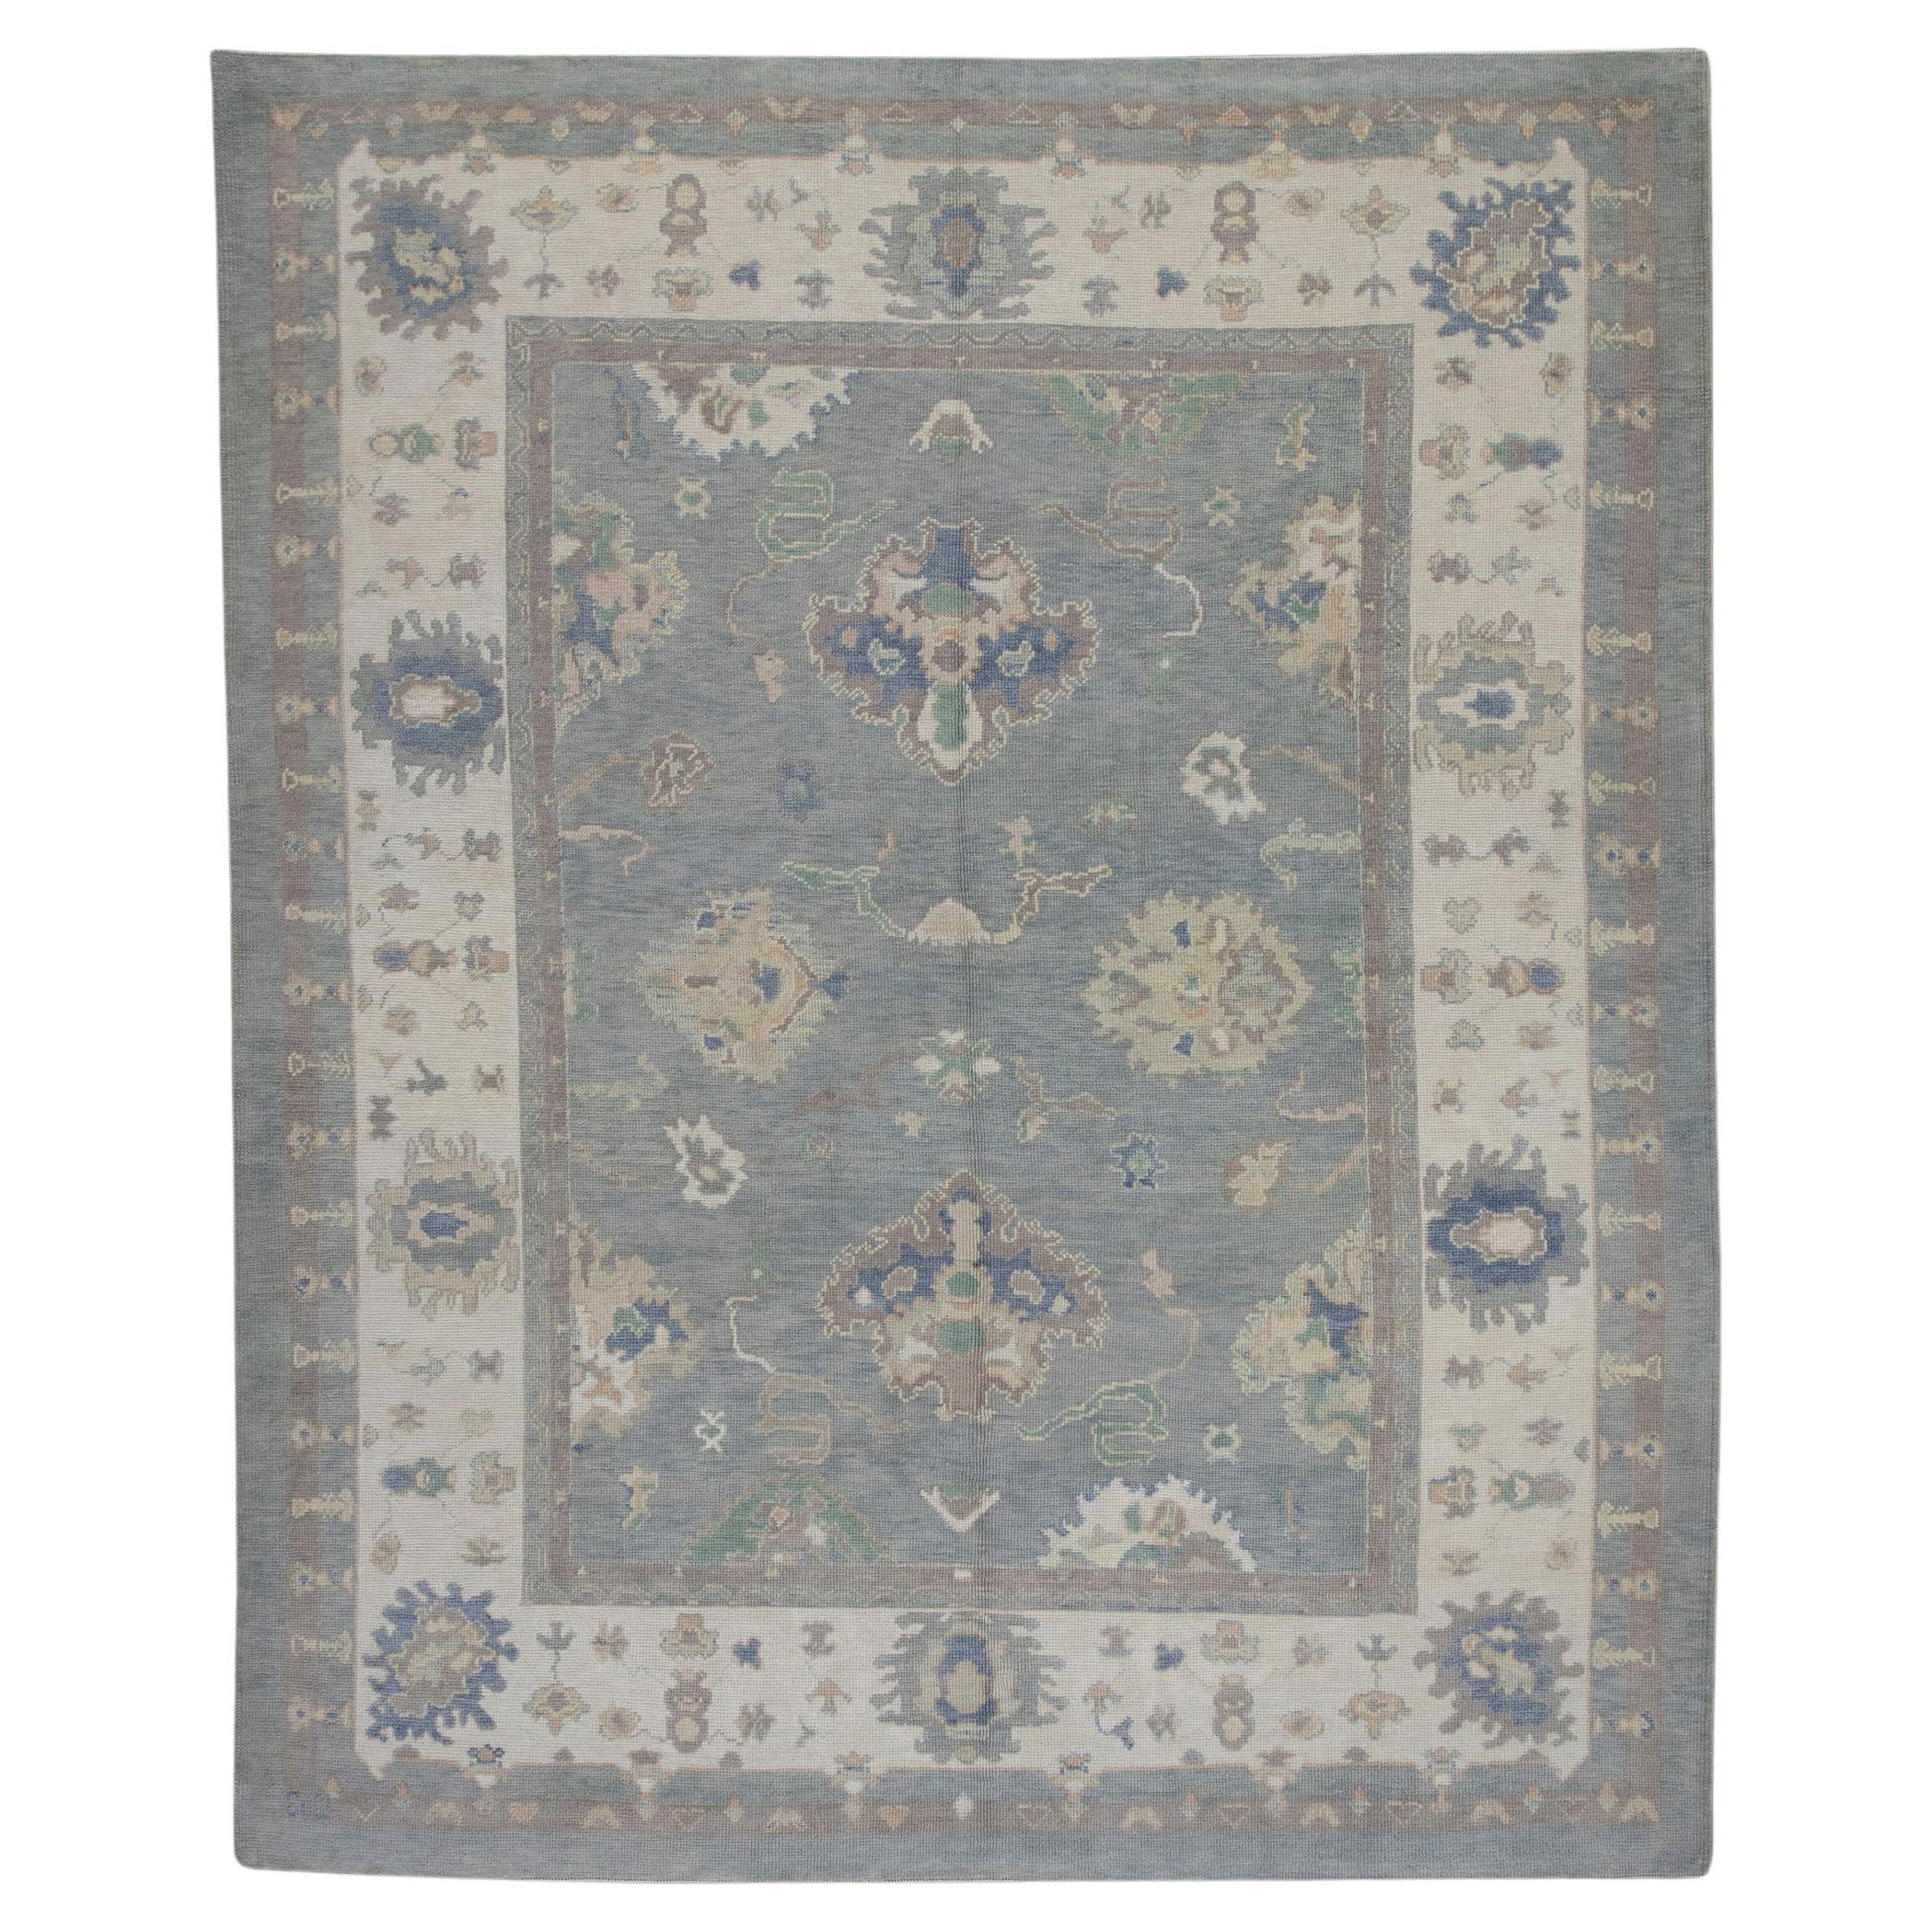 Blue Colorful Floral Pattern Handwoven Wool Turkish Oushak Rug 8'3" x 9'10" For Sale